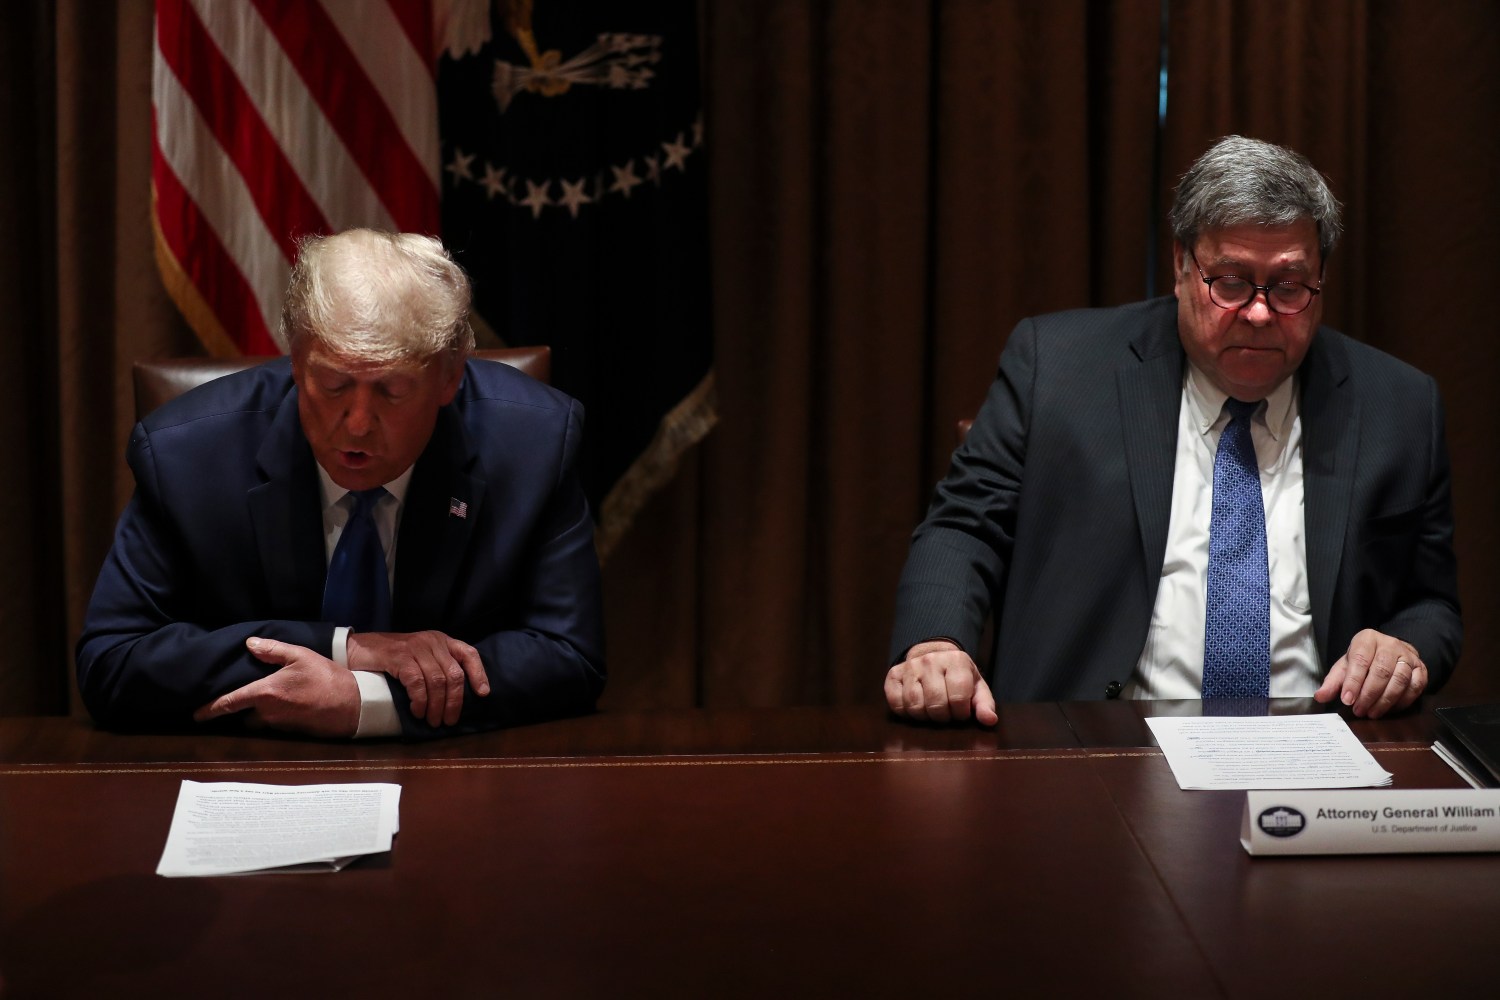 President Donald Trump speaks as US Attorney General William Barr listens during a discussion with State Attorneys General on Protecting Consumers from Social Media Abuses in the Cabinet Room of the White House on Wednesday, Sep. 23, 2020 in Washington, DC.(Photo by Oliver Contreras/For The New York Times)No Use UK. No Use Germany.